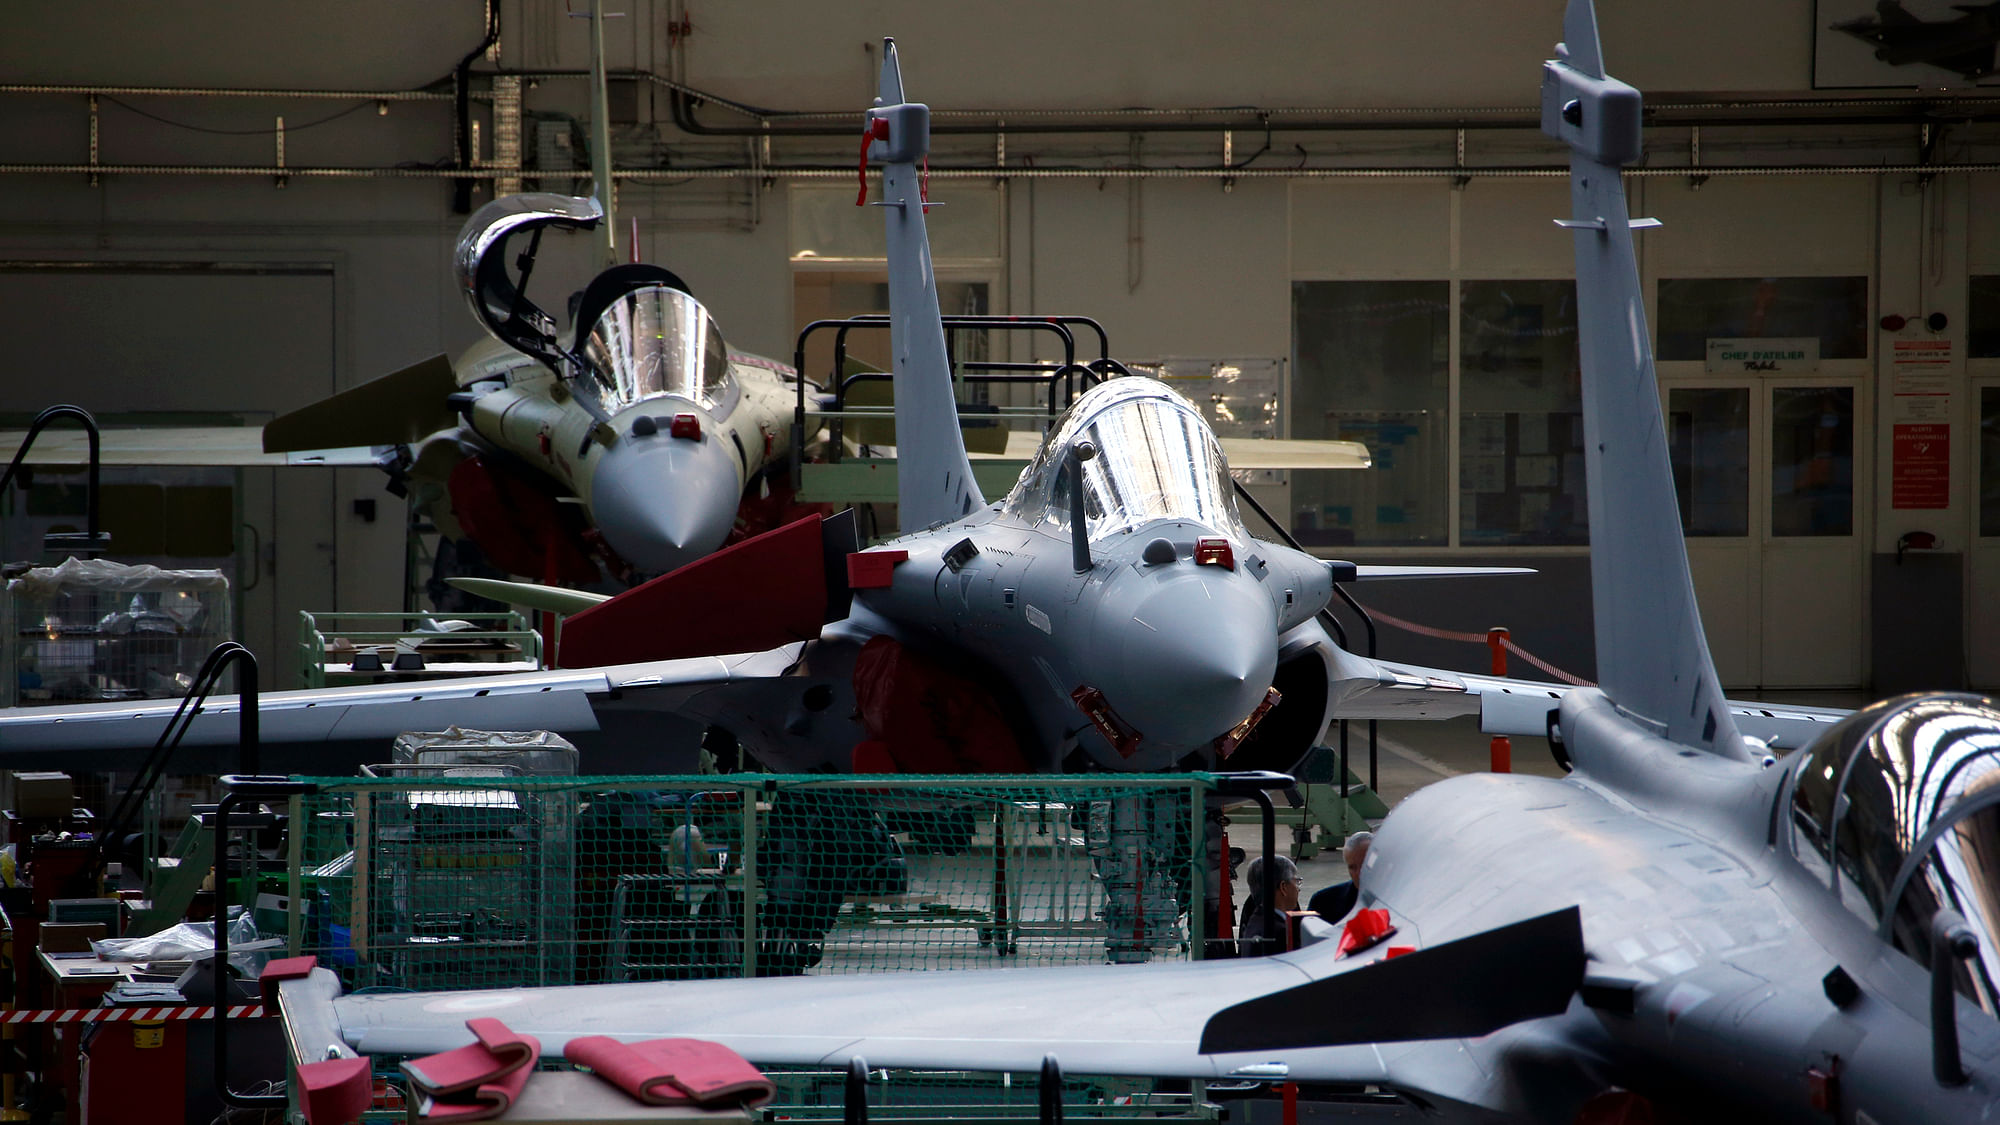 Rafale jet fighters on the assembly line in Dassault Aviation’s factory in Merignac, France. (Photo Courtesy: Reuters)